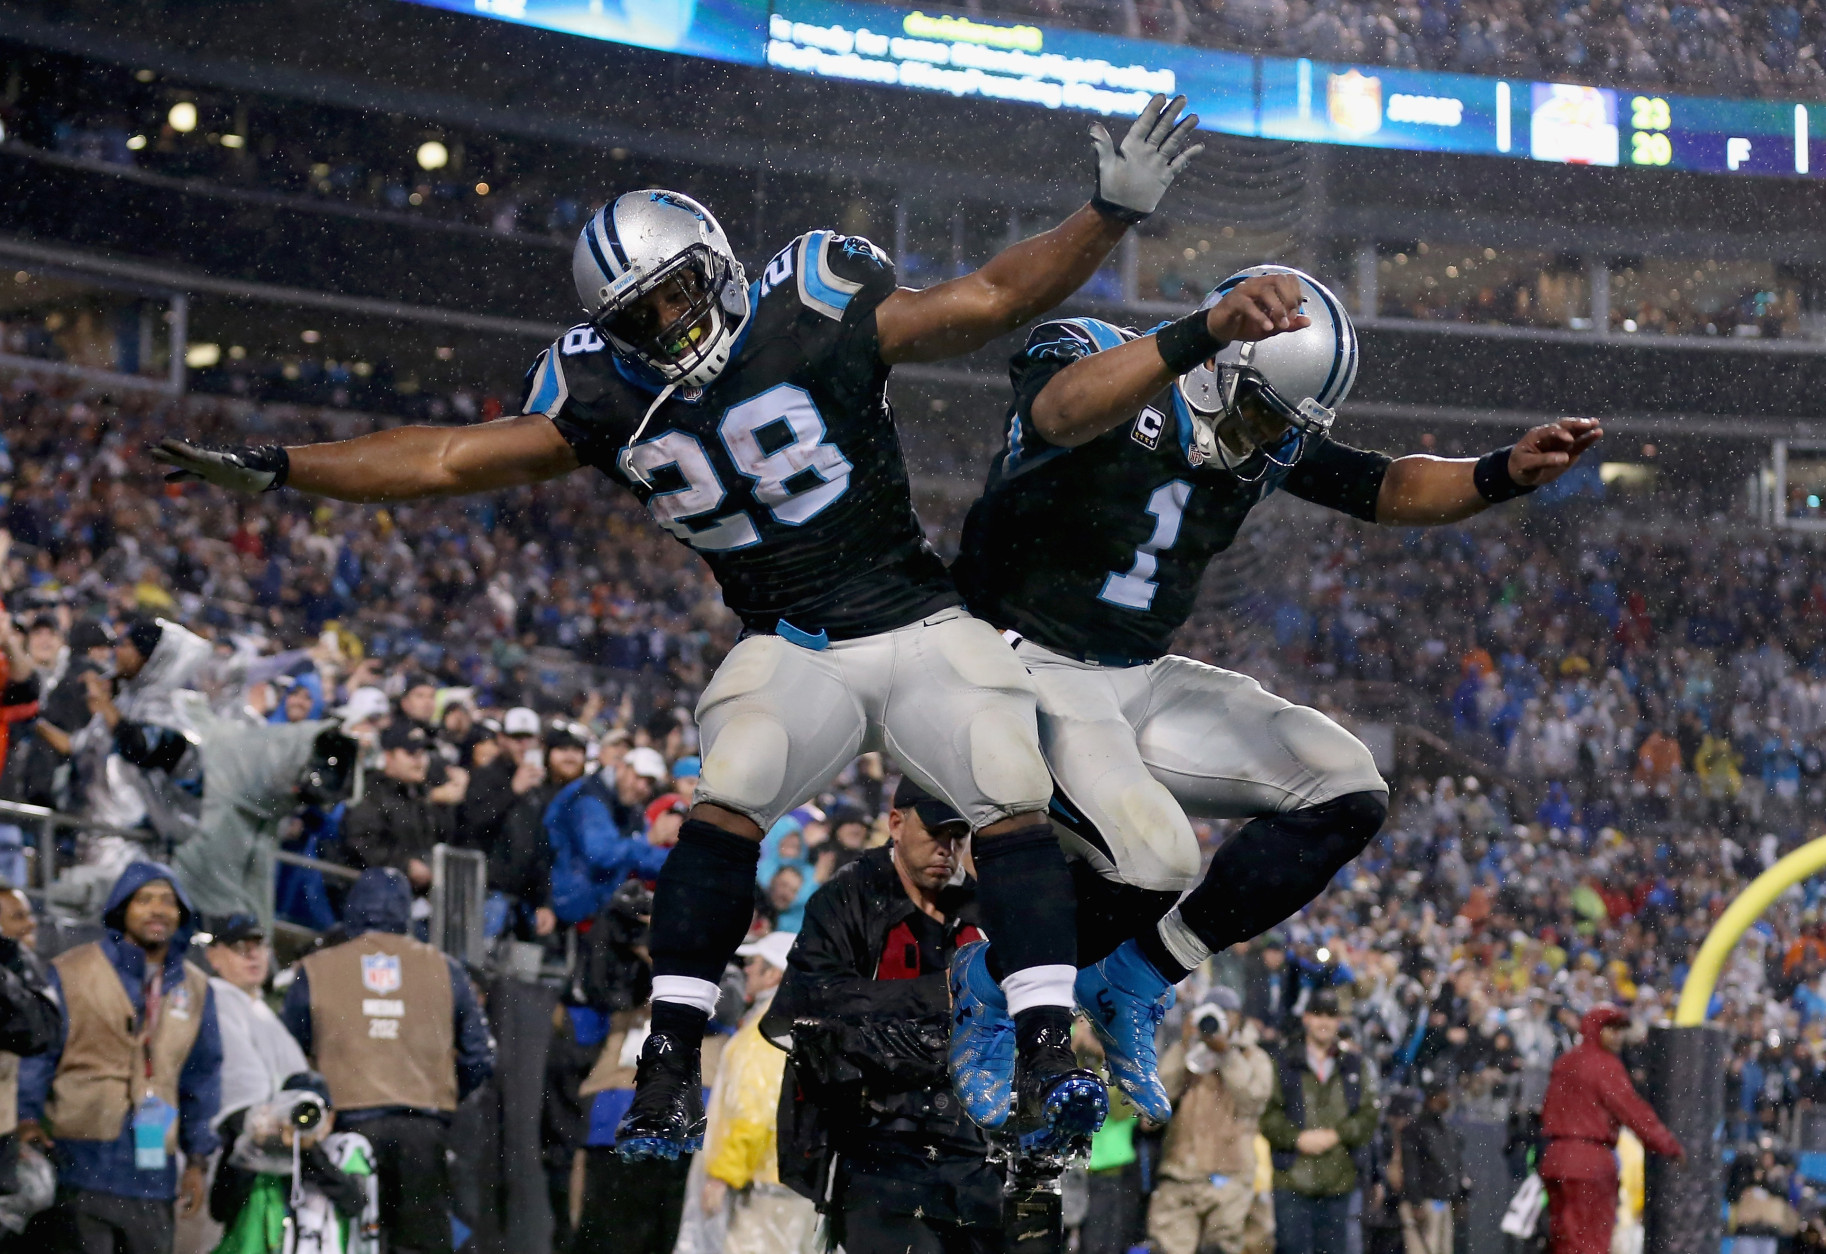 CHARLOTTE, NC - NOVEMBER 02:  Cam Newton #1 and  Jonathan Stewart #28 of the Carolina Panthers celebrate a touchdown against the Indianapolis Colts in the 1st quarter during their game at Bank of America Stadium on November 2, 2015 in Charlotte, North Carolina.  (Photo by Streeter Lecka/Getty Images)